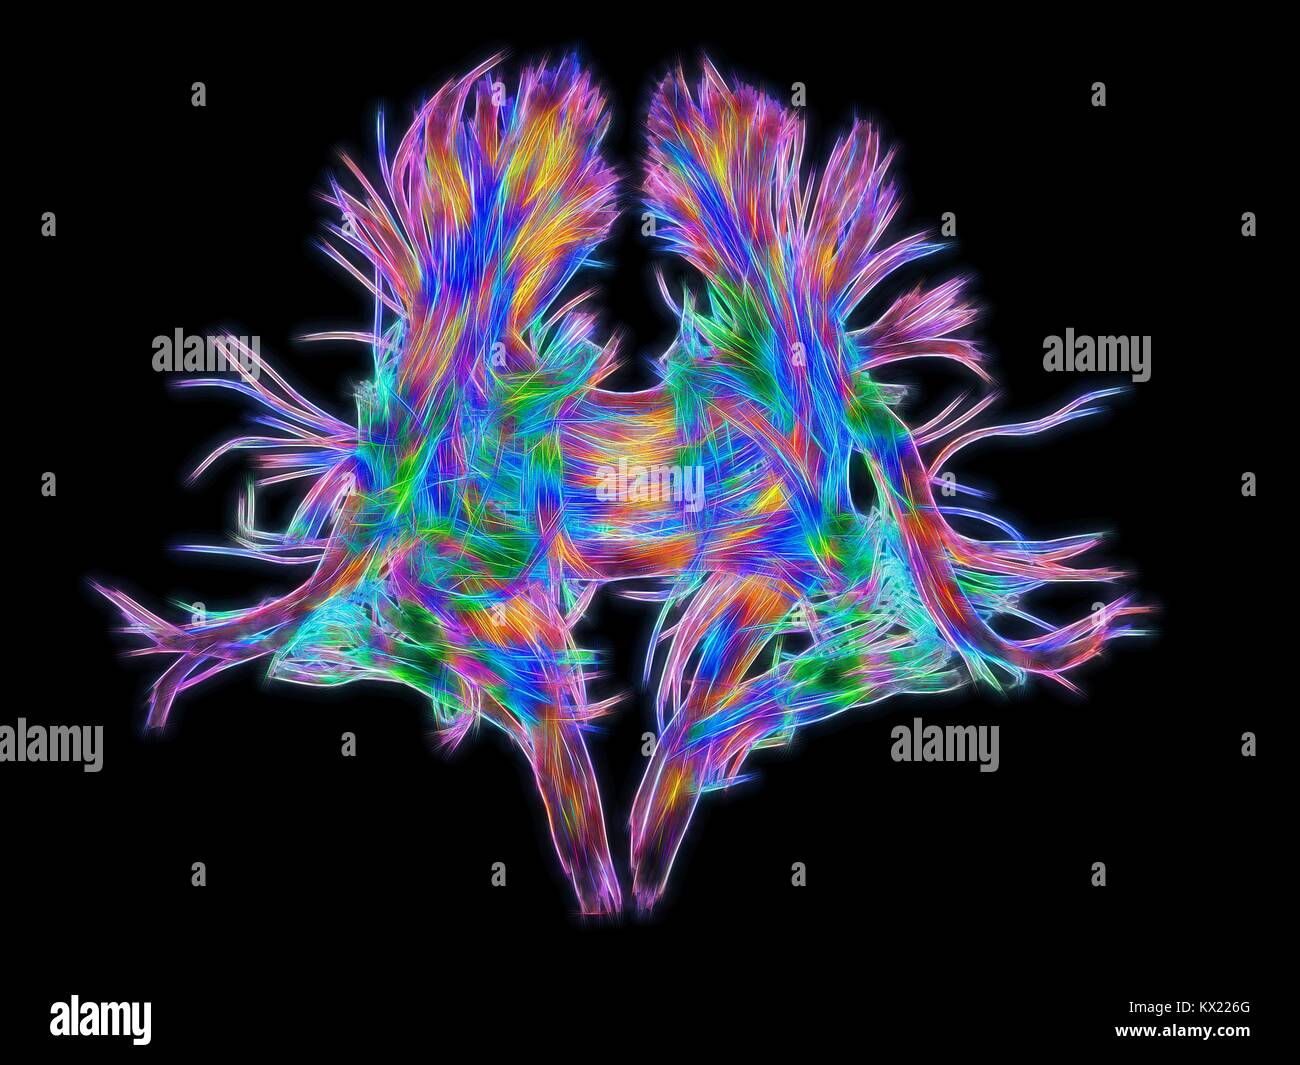 White matter fibres. Computer enhanced 3D diffusion spectral imaging (DSI) scan of the bundles of white matter nerve fibres in the brain. The fibres transmit nerve signals between brain regions and between the brain and the spinal cord. Diffusion spectrum imaging (DSI) is a variant of magnetic resonance imaging (MRI) in which a magnetic field maps the water contained in neuron fibers, thus mapping their criss-crossing patterns. A similar technique called diffusion tensor imaging (DTI) is also used to explore neural data of white matter fibres in the brain. Both methods allow mapping of their Stock Photo